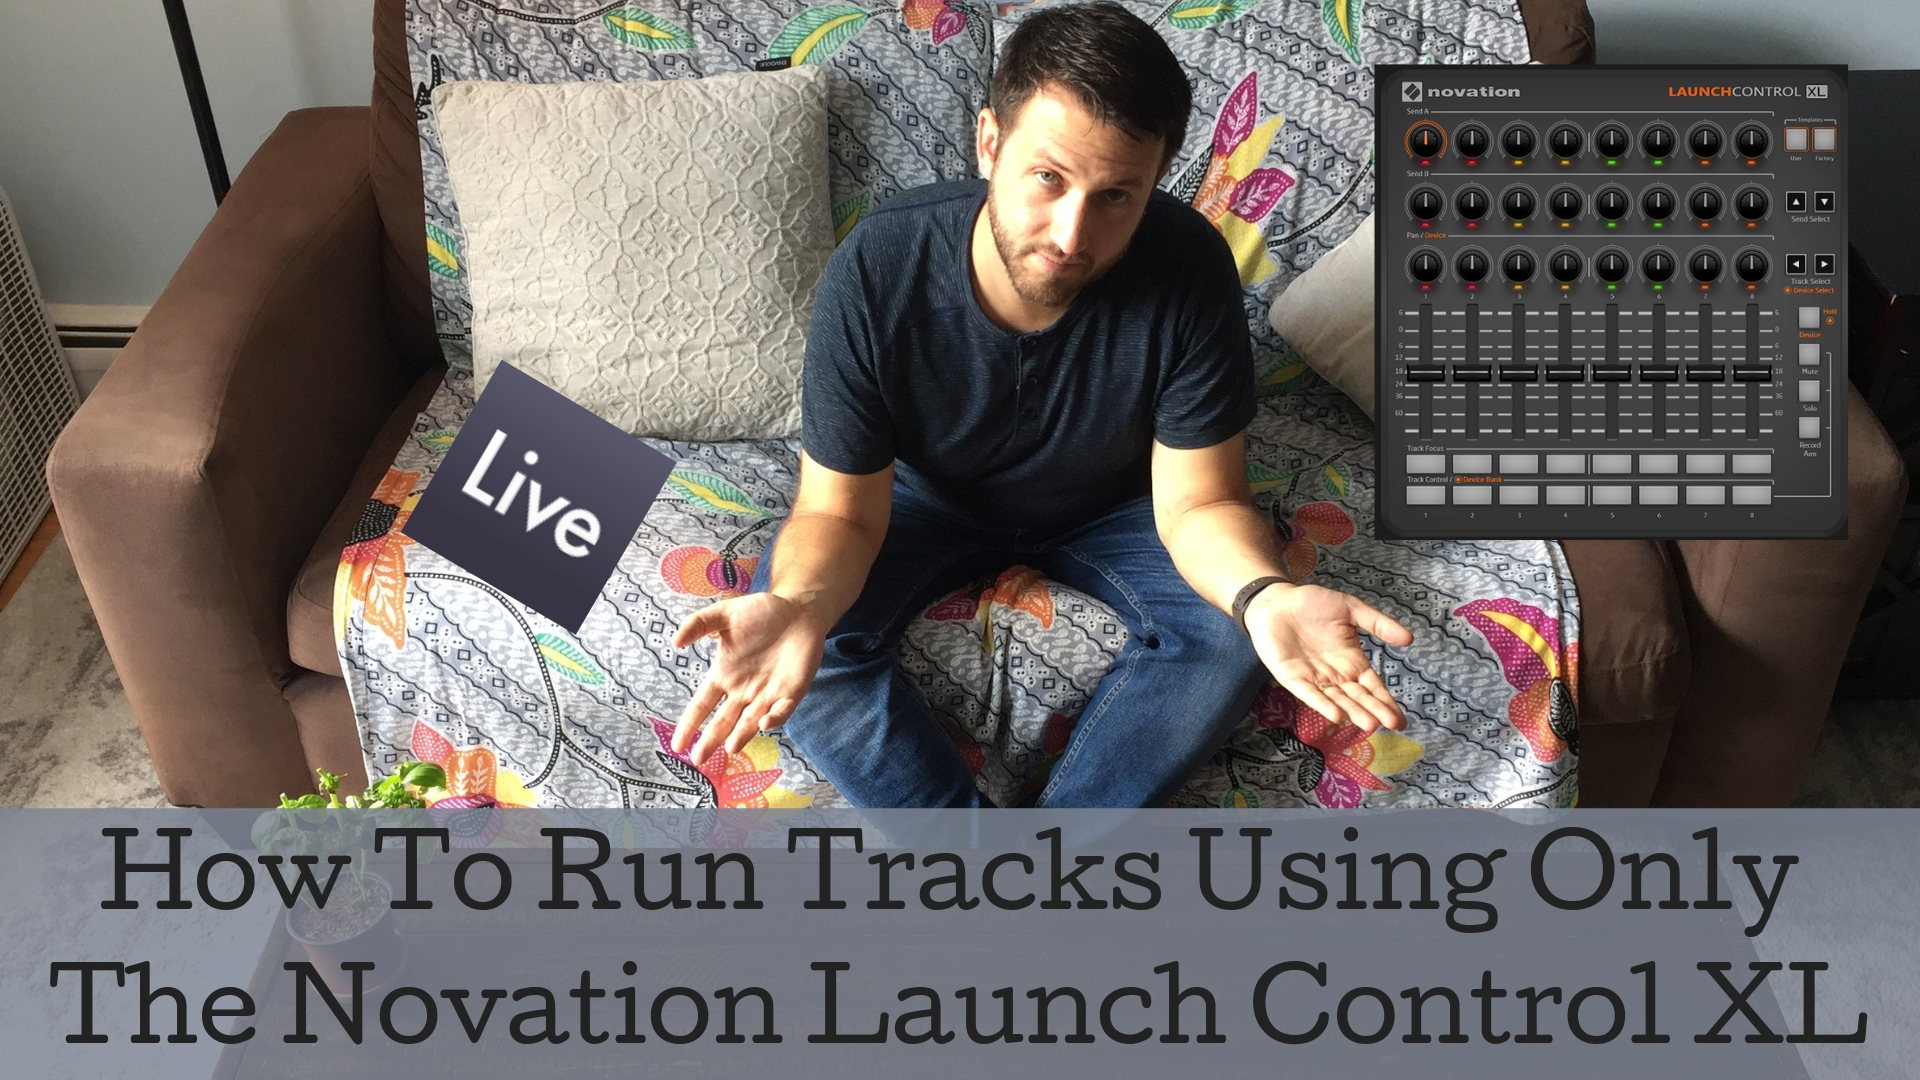 How To Run Tracks Using Only The Novation Launch Control XL